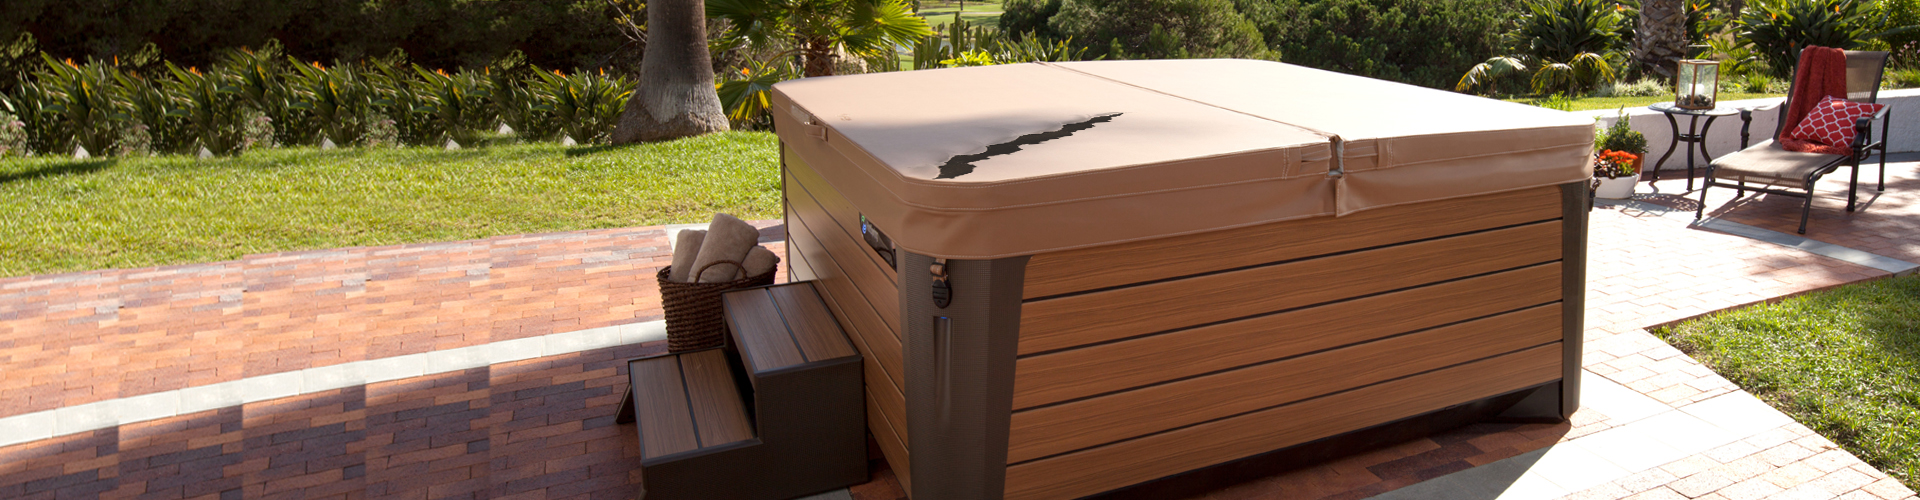 How to Tell if Your Hot Tub Cover Needs to be Replaced